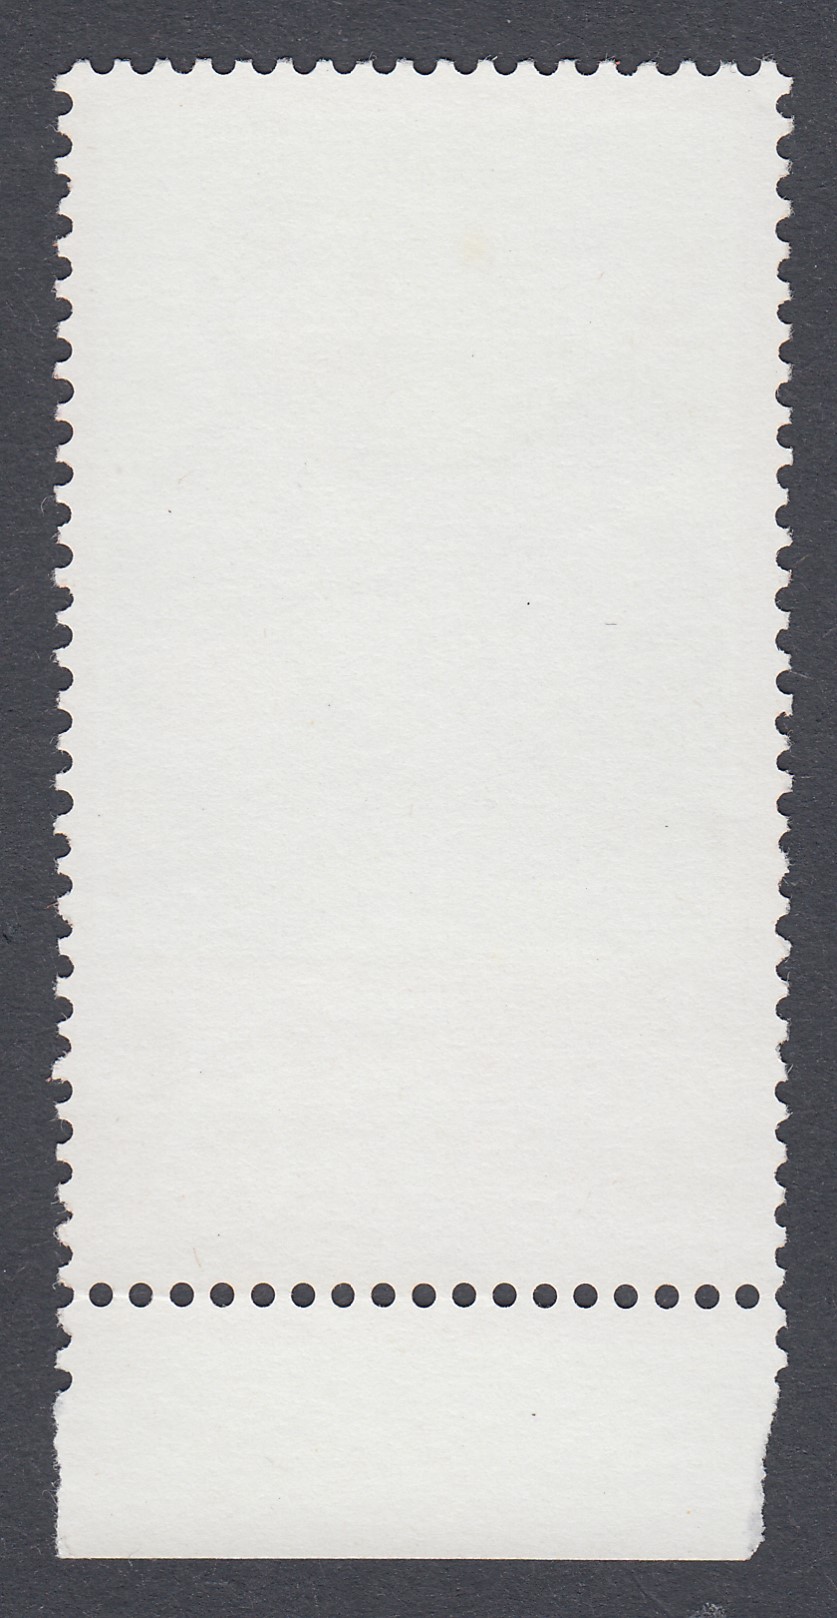 STAMPS CHINA 1967 Thoughts of Mao, 8f fine U/M bottom marginal example, SG 2343. - Image 2 of 2